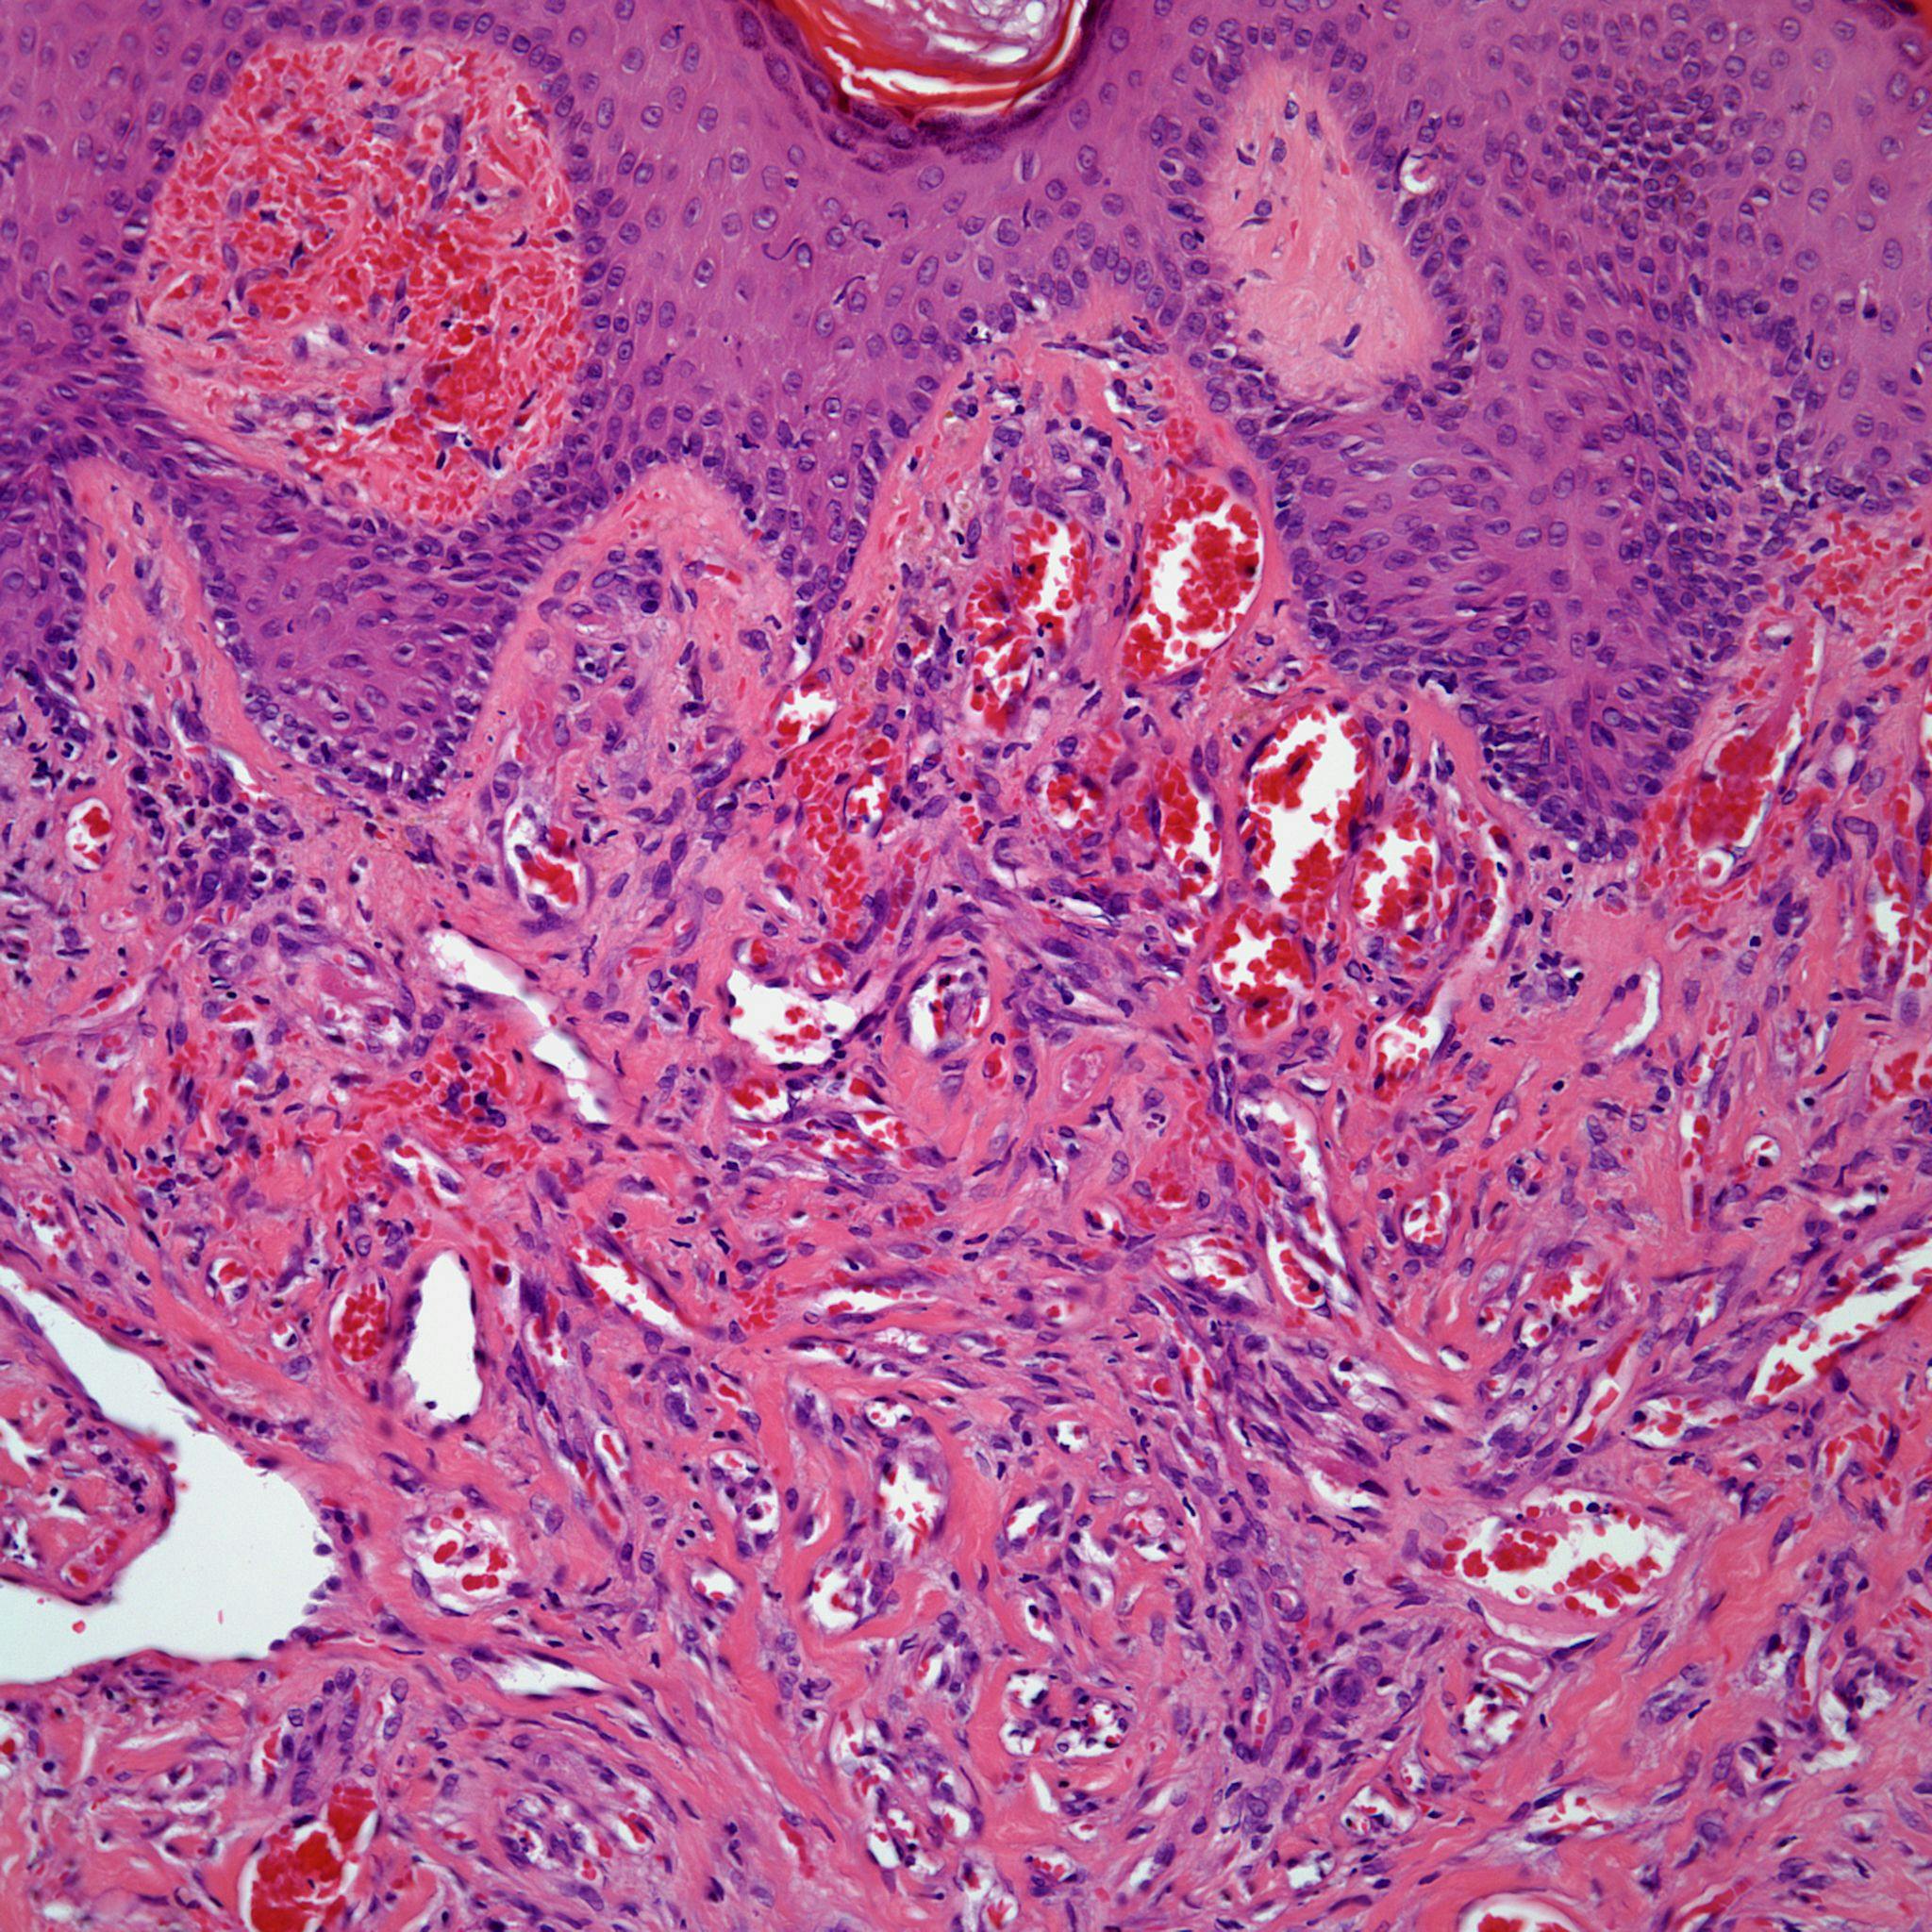 Diagnose This 58-Year-Old Man With Purpuric Nodules